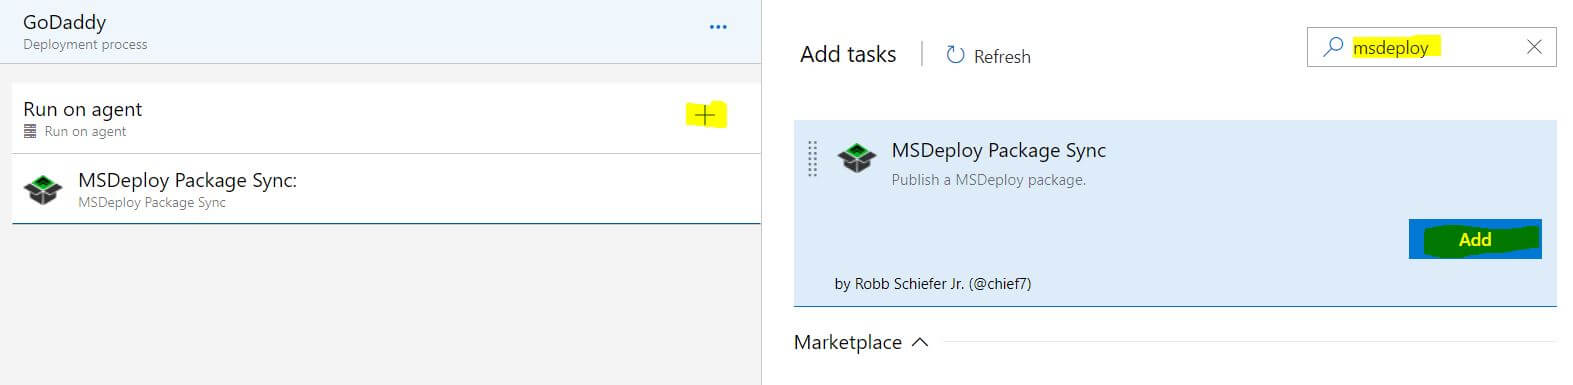 MsDeploy Package Sync task